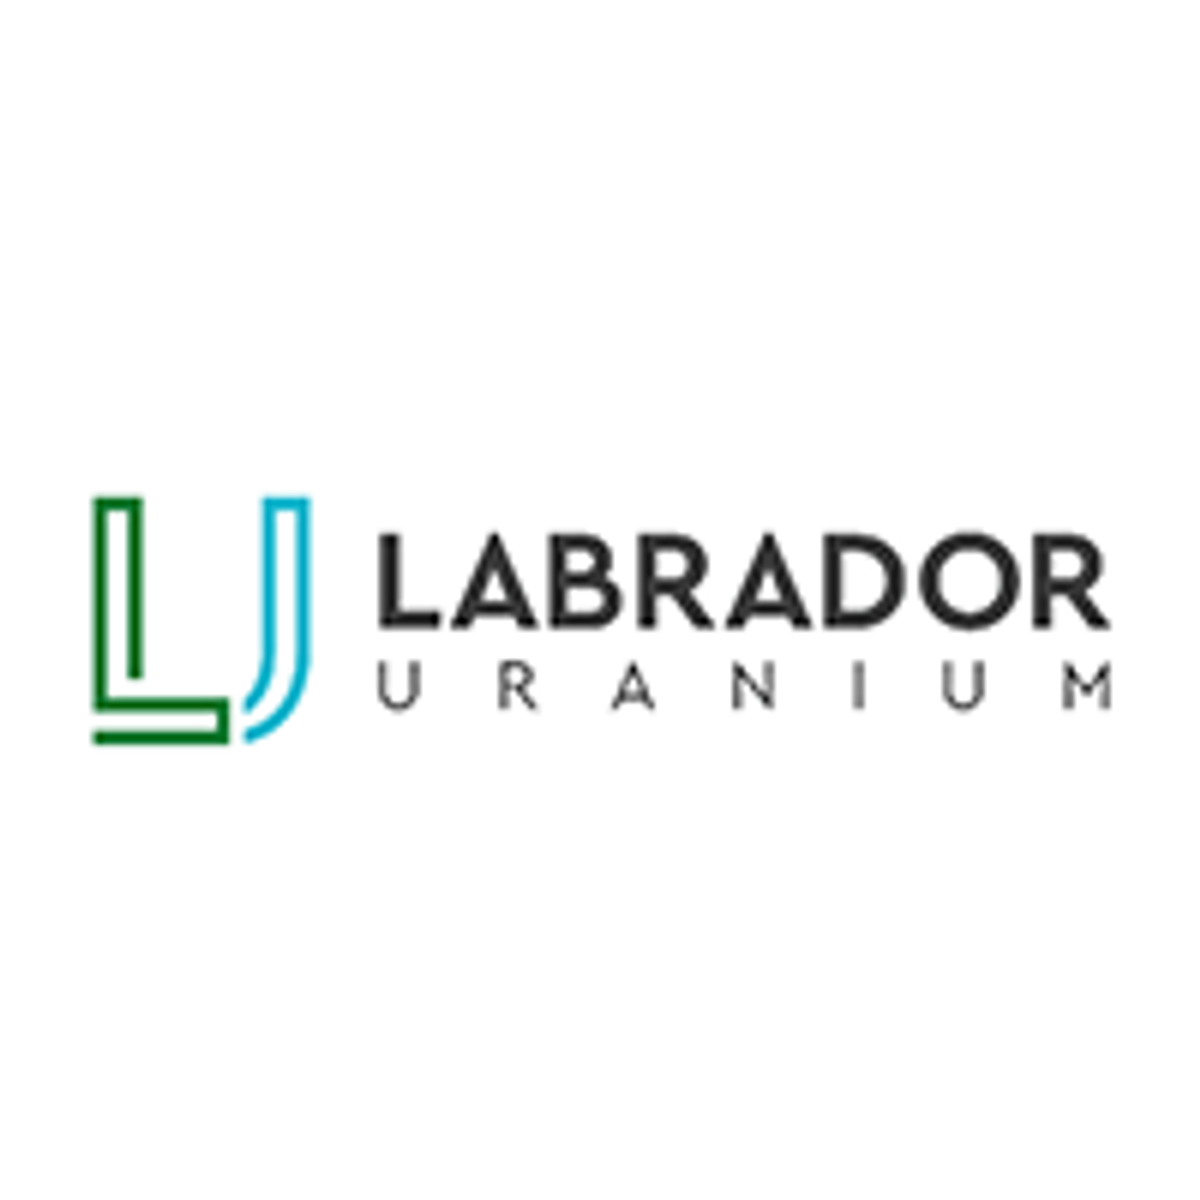 Labrador Uranium Provides Exploration and Machine Learning Update: Continuing to Add Targets